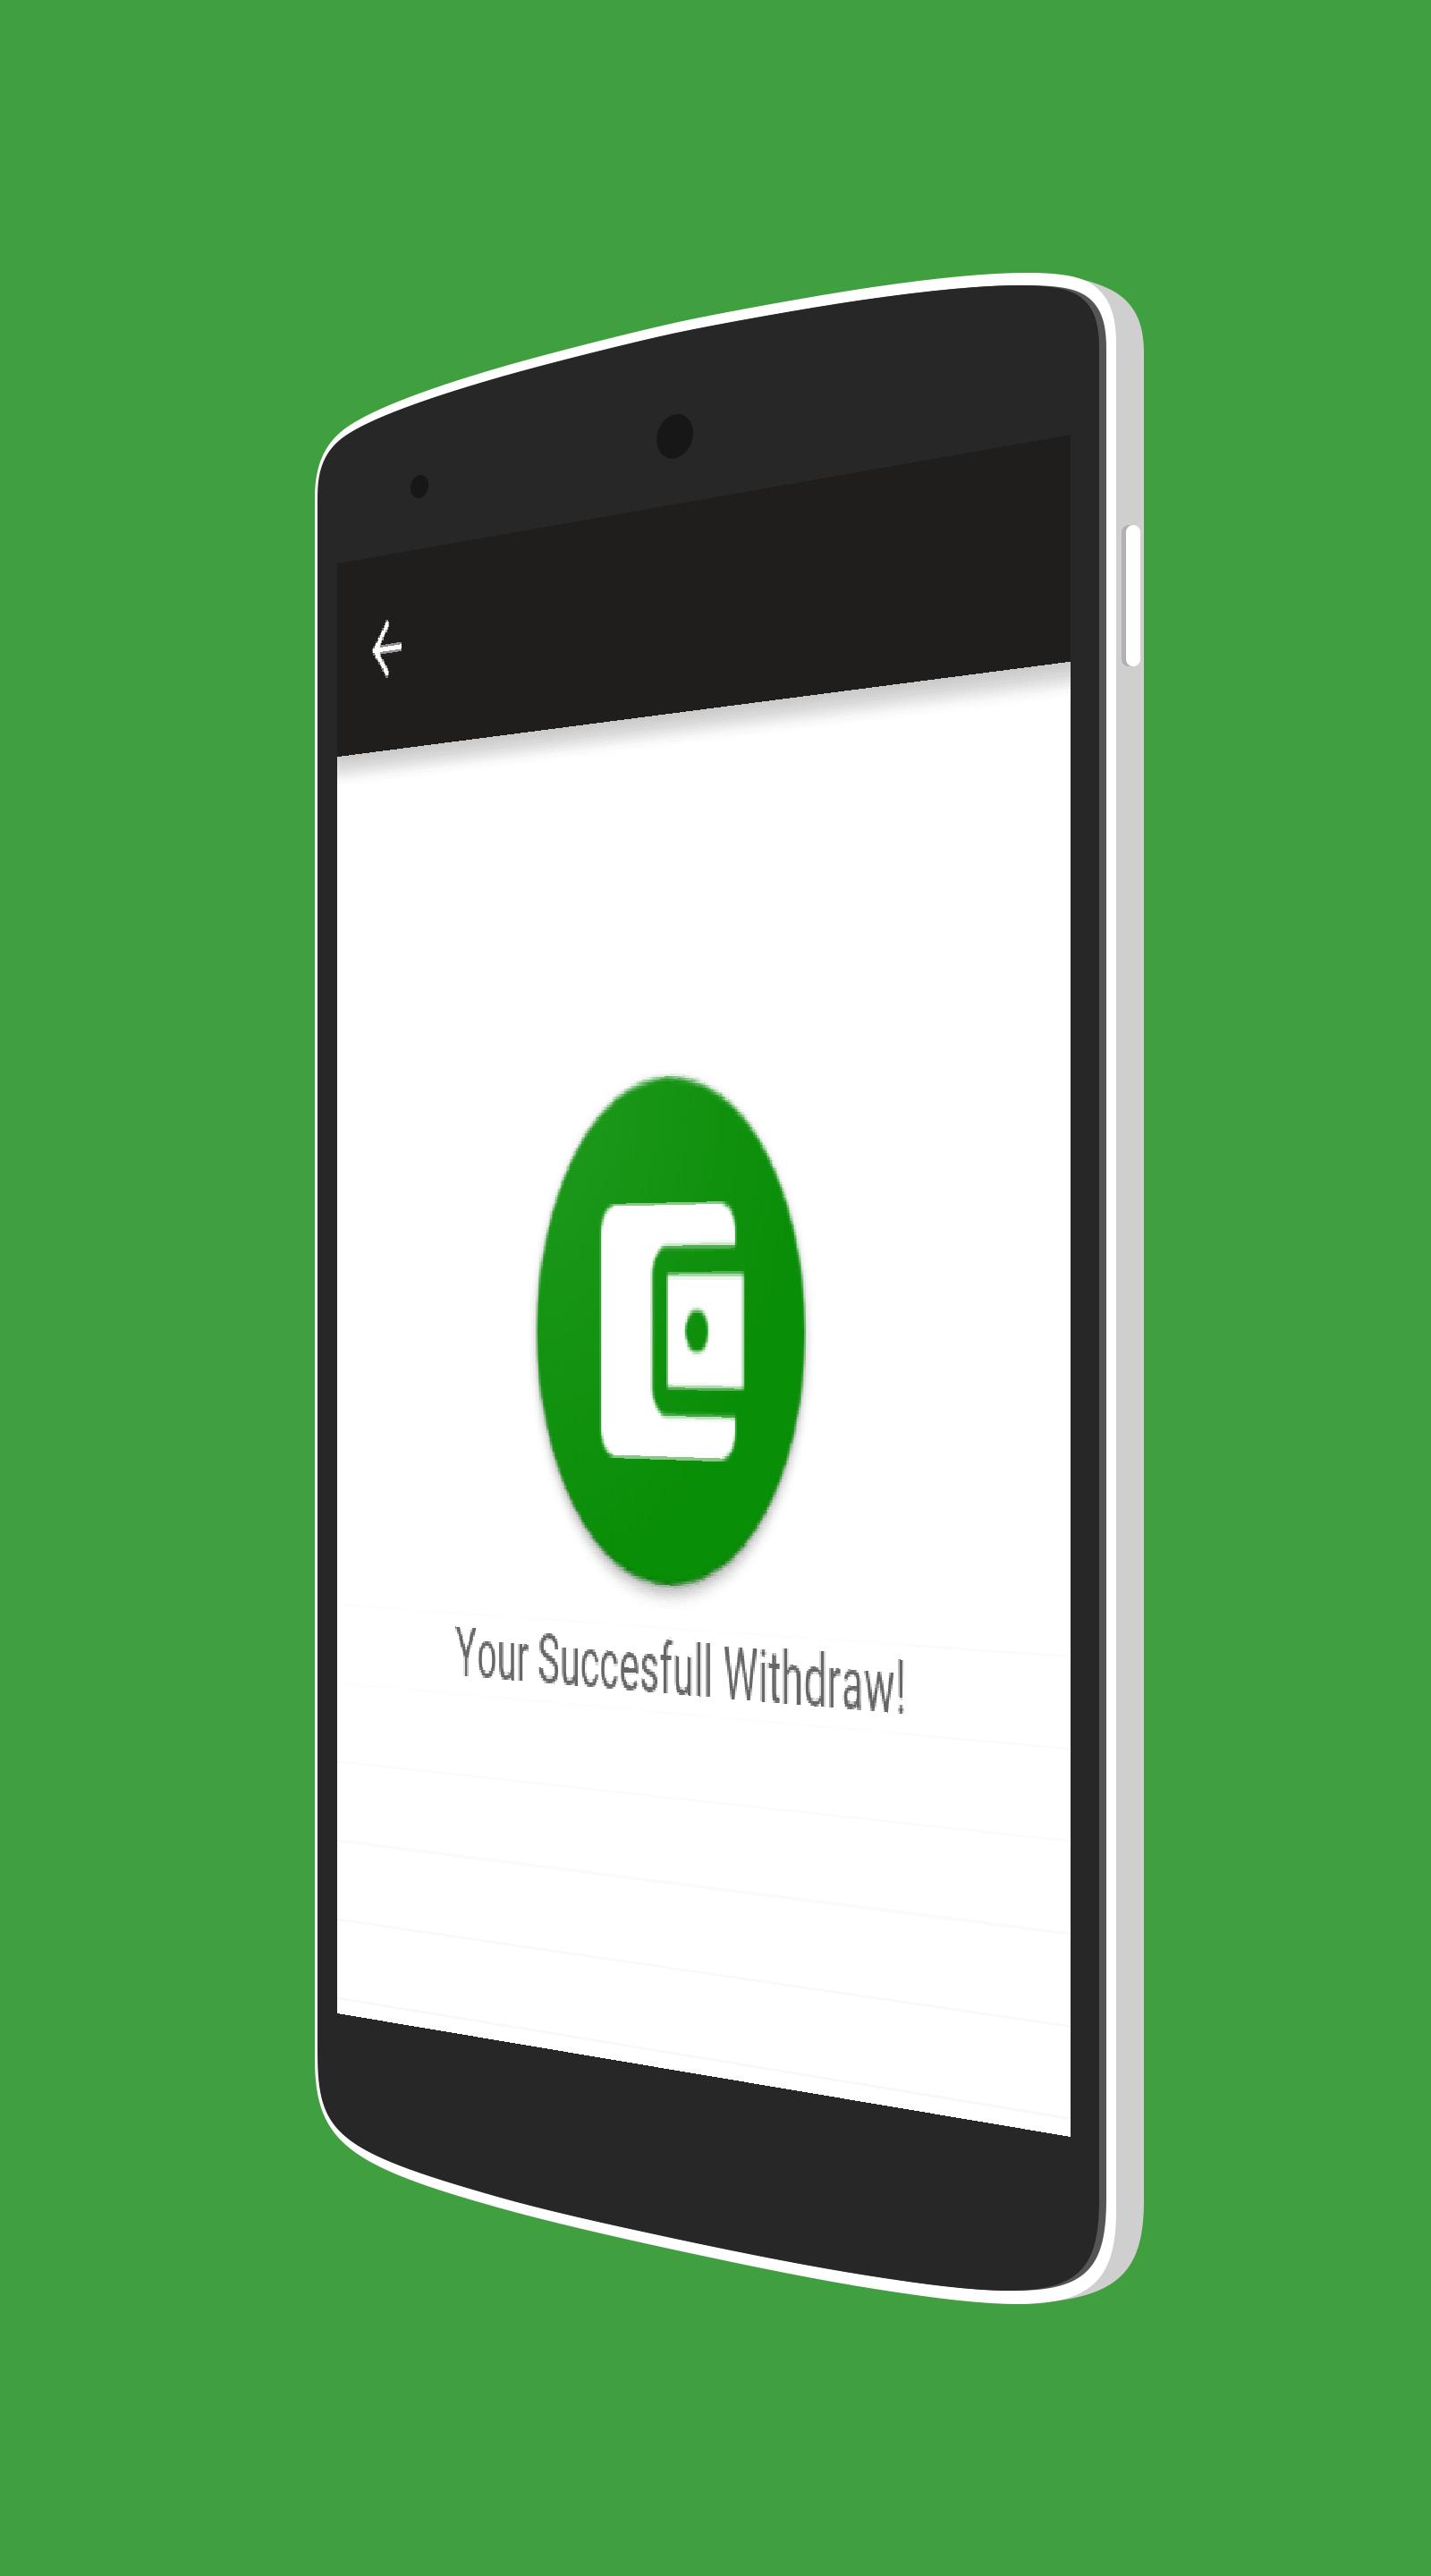 Bytecoin Faucet Free for Android - APK Download